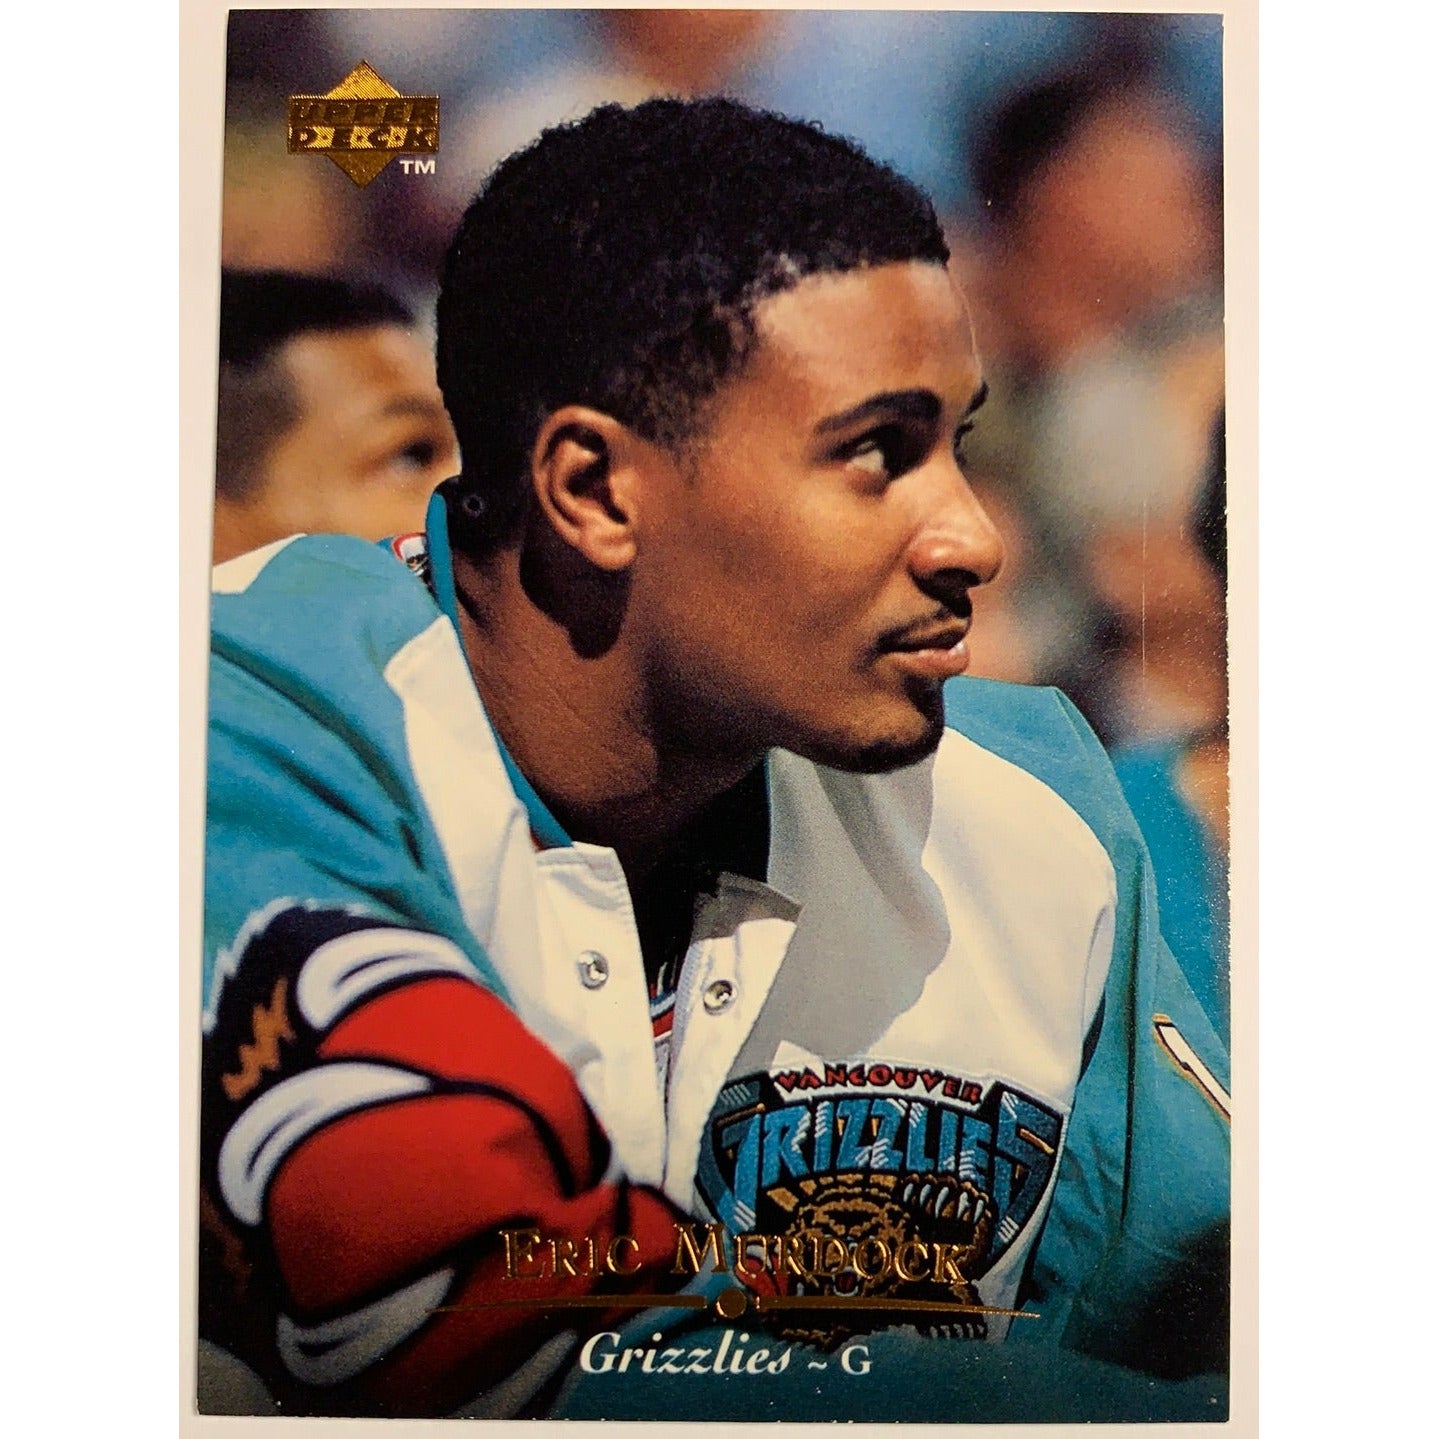 1995-96 Upper Deck Eric Murdock Base #304-Local Legends Cards & Collectibles